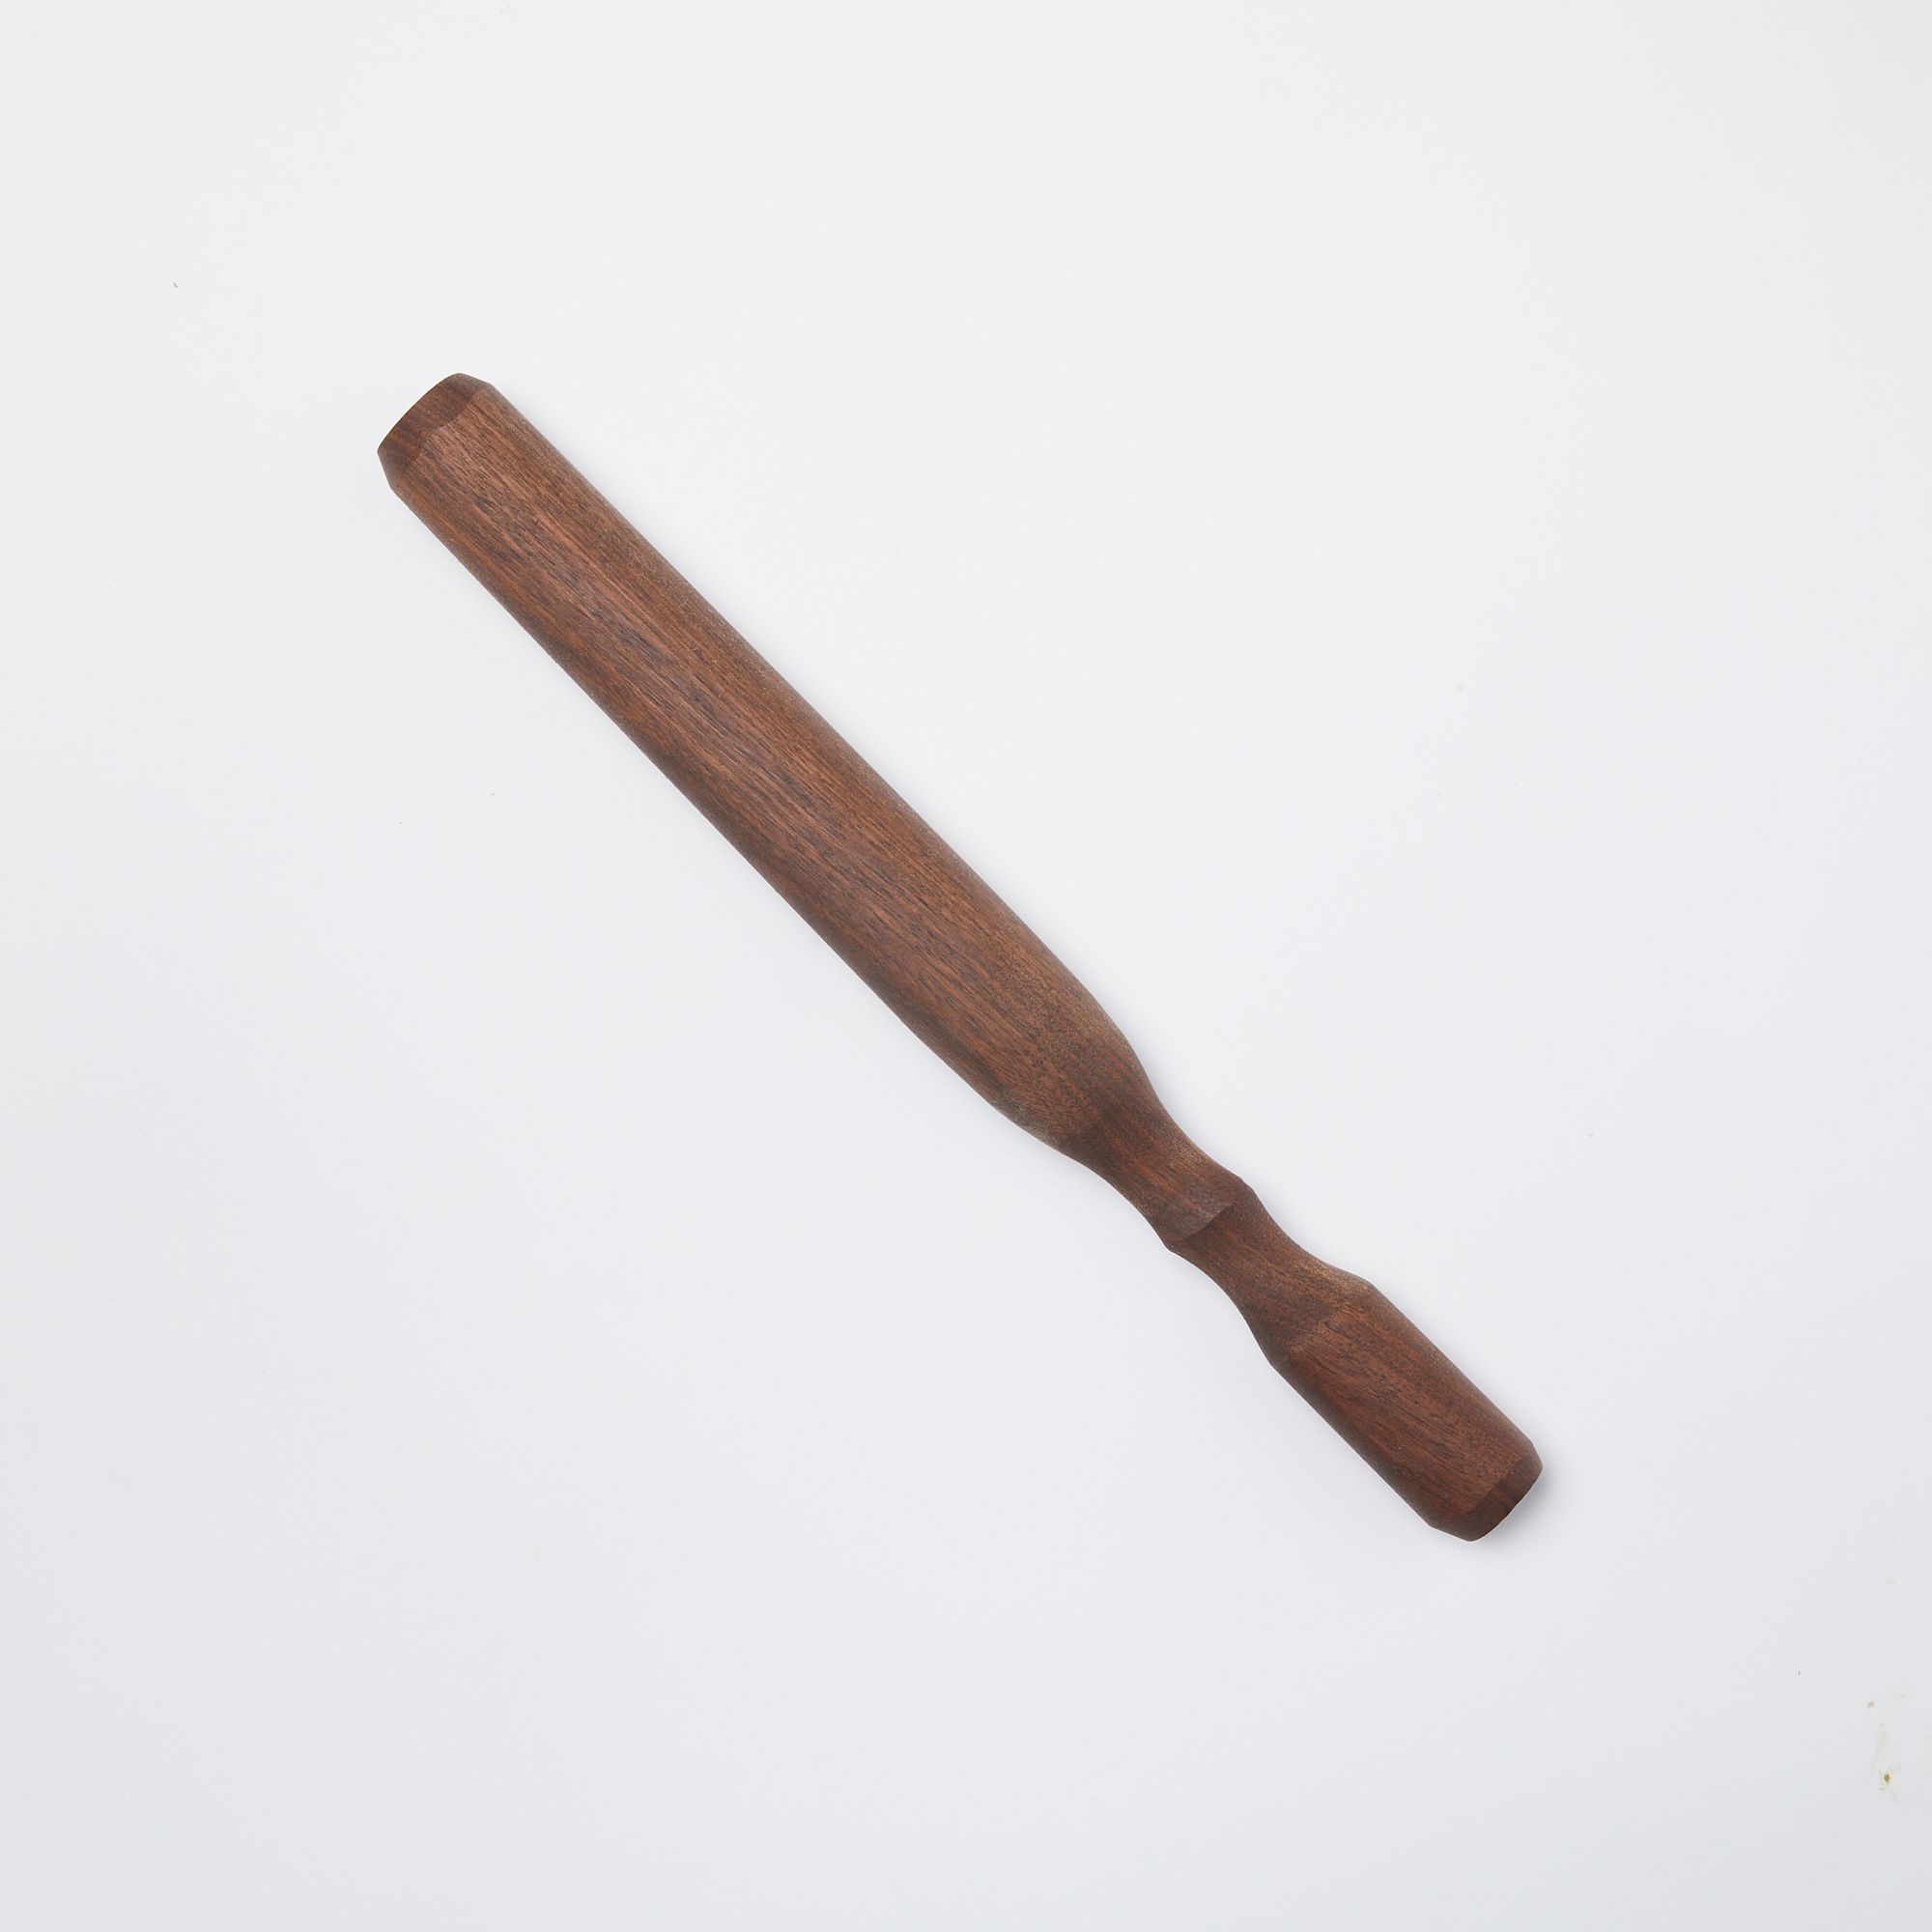 Long walnut wood cocktail muddler that tapers slightly towards the handle